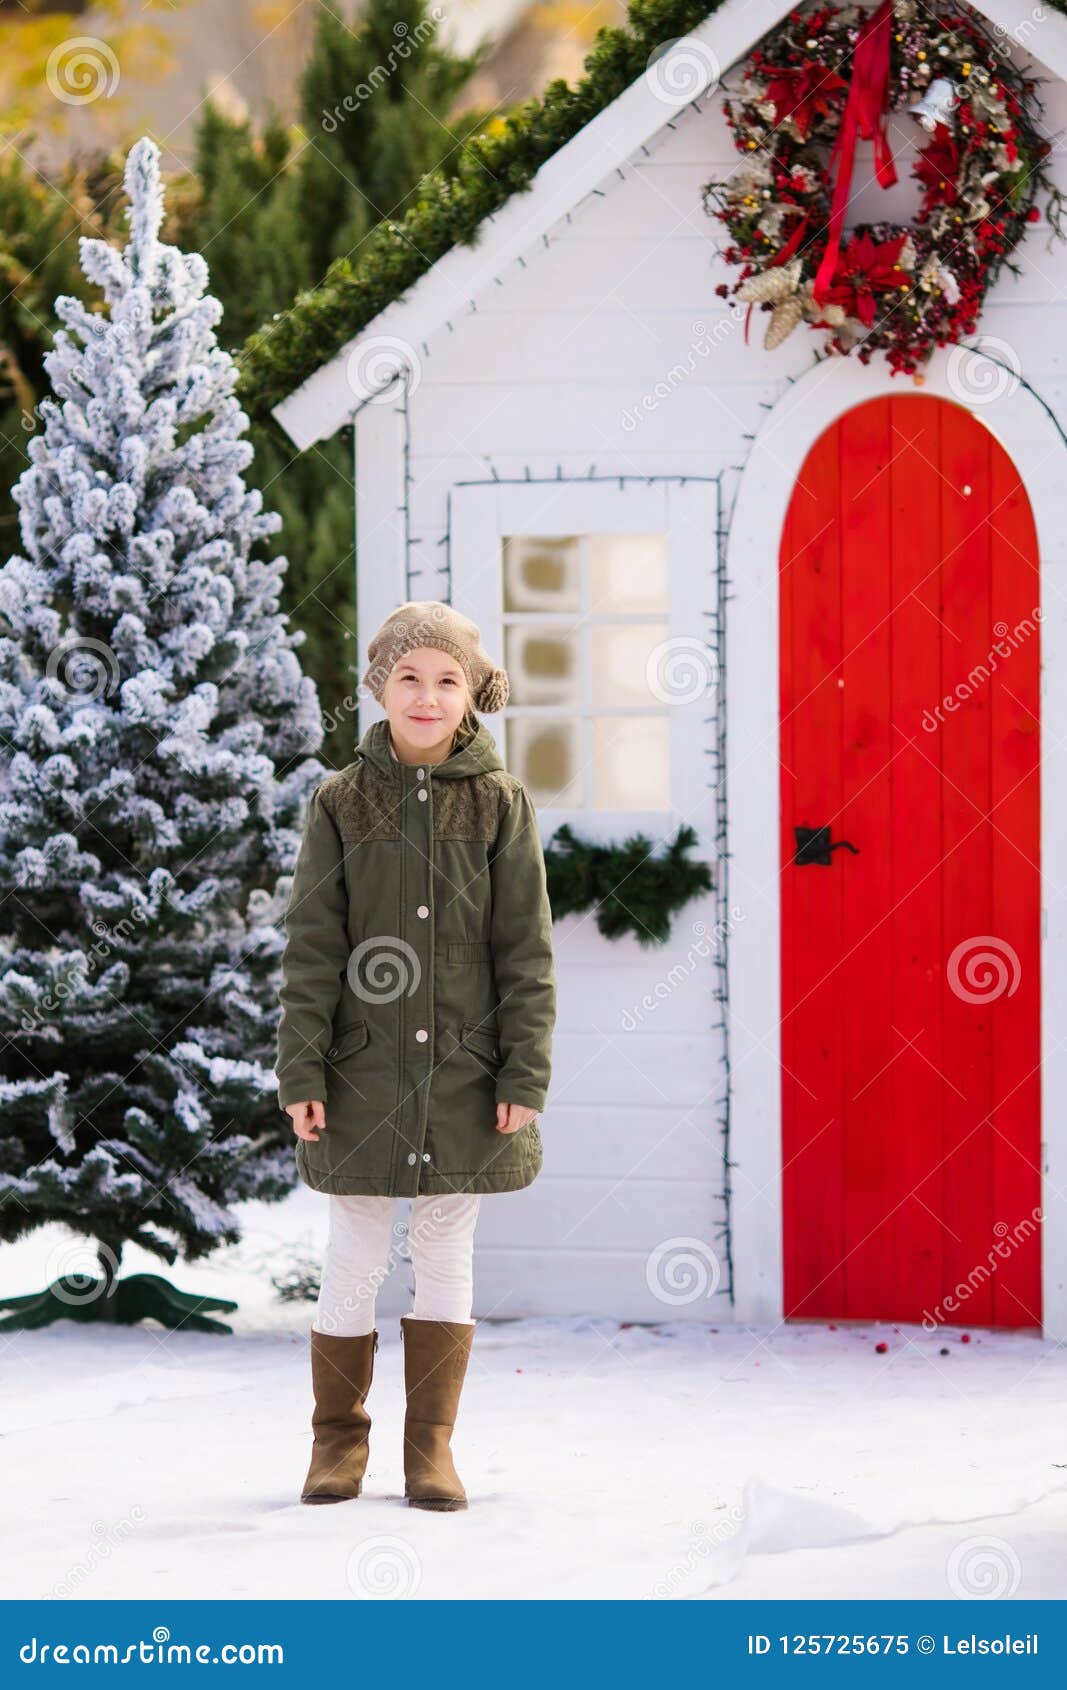 Cute Blonde Girl Near The Small House And Snow Covered Trees New Year